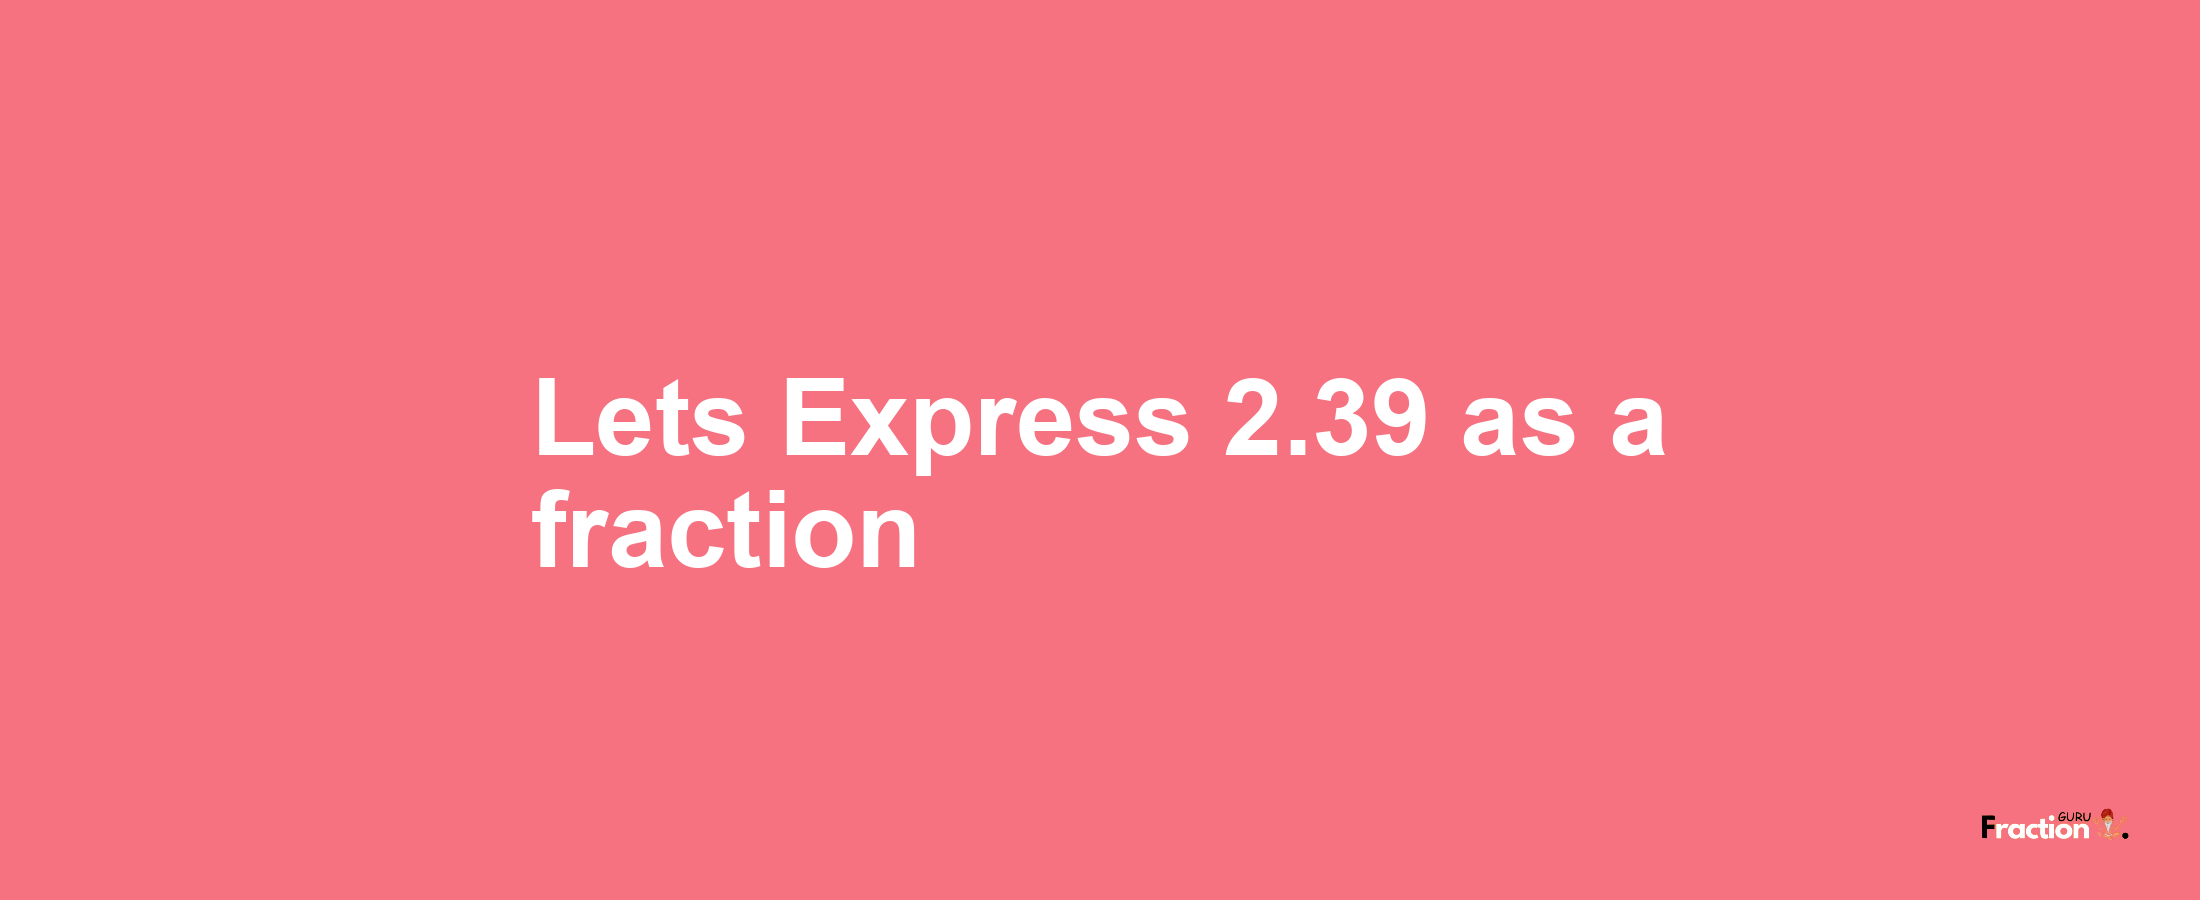 Lets Express 2.39 as afraction